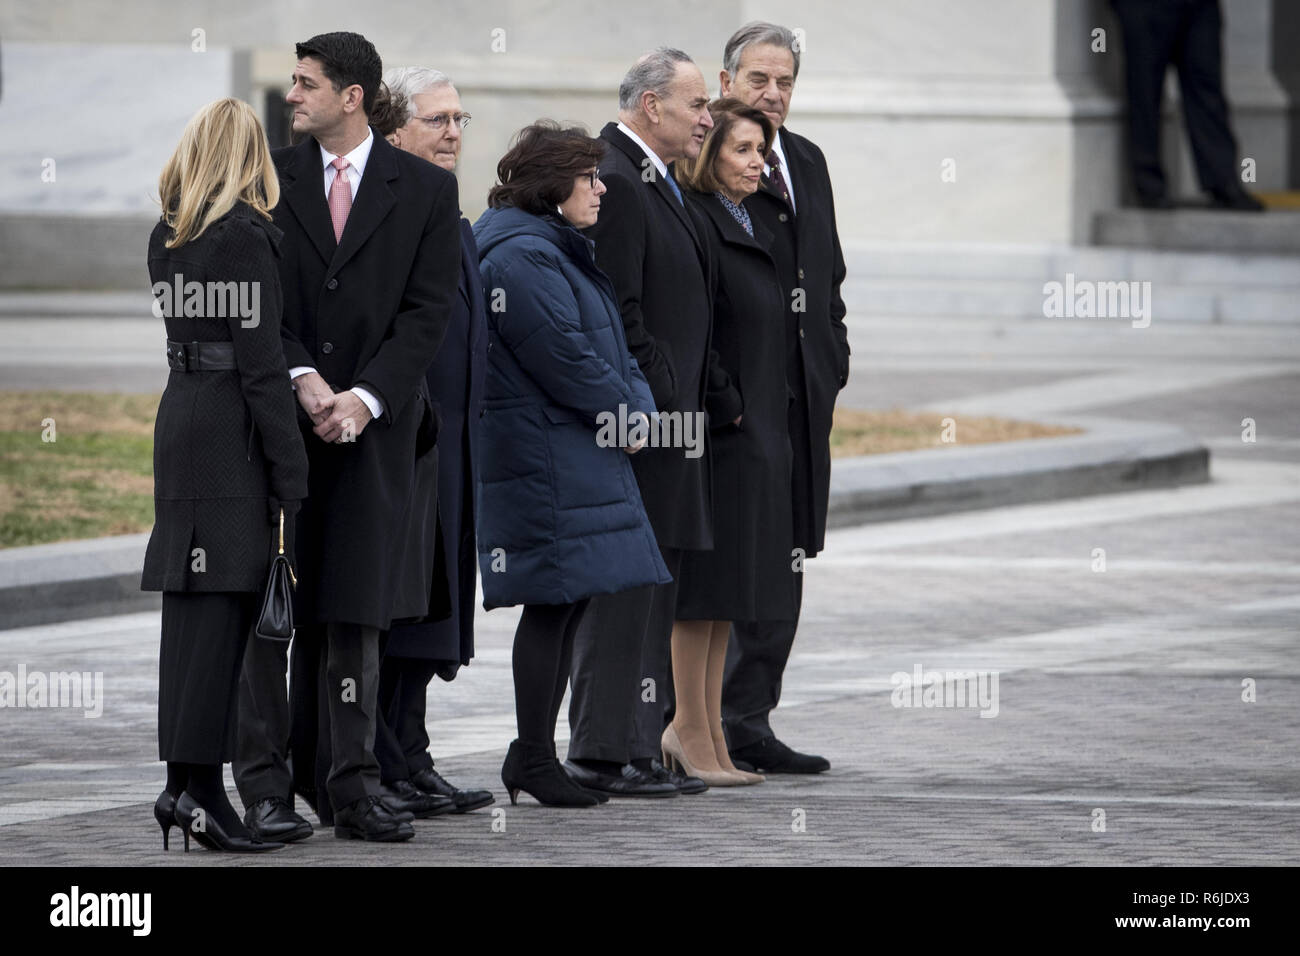 Washington, District of Columbia, USA. 5th Dec, 2018. Congressional leadership including House Speaker Rep. Paul Ryan, Senate Majority Leader Sen. Mitch McConnell, Senate Minority Leader Sen. Chuck Schumer, House Minority Leader Rep. Nancy Pelosi and their respective spouses, gather on the East Front to view the remains of President George H.W. Bush be transported from the U.S. Capitol to the National Cathedral Wednesday December 5, 2018. (Photo by Sarah Silbiger/The New York Times) Credit: Sarah Silbiger/CNP/ZUMA Wire/Alamy Live News Stock Photo